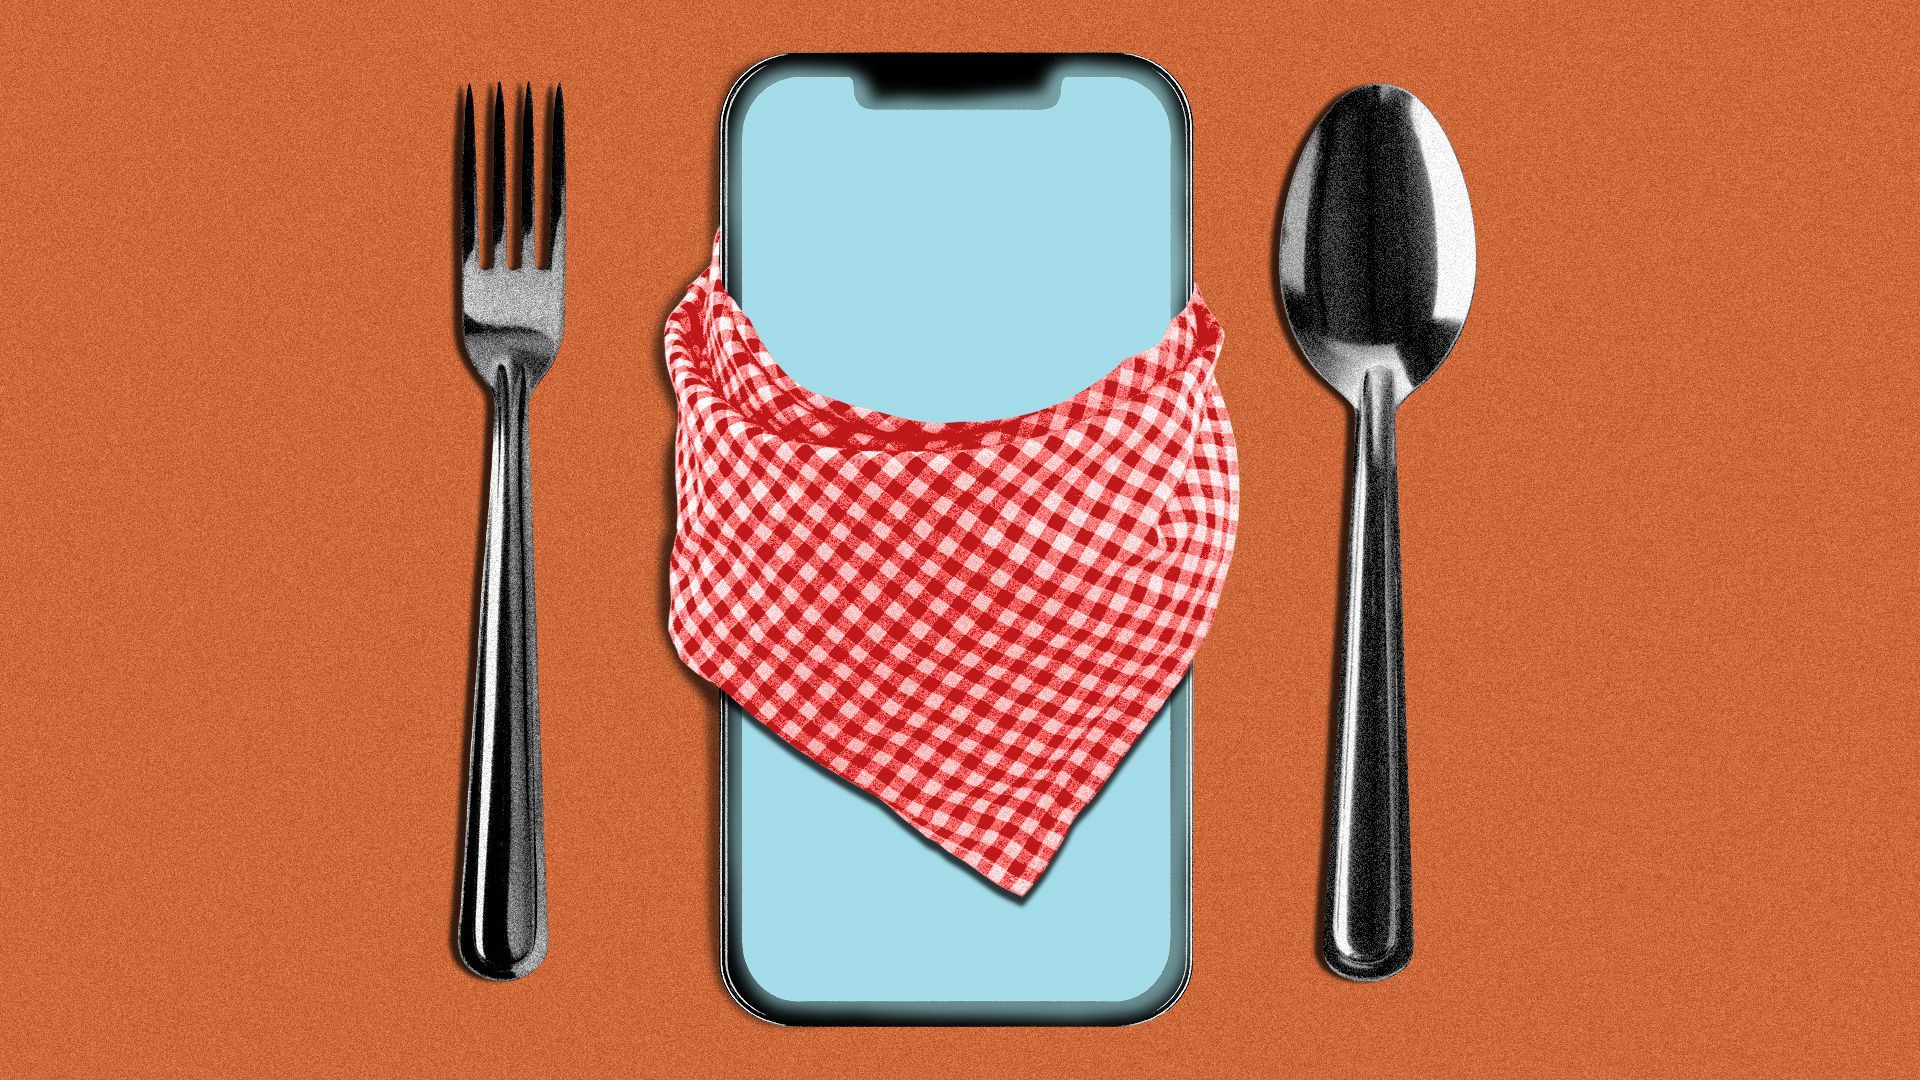 Illustration of a cell phone wearing a napkin in between a fork and spoon.